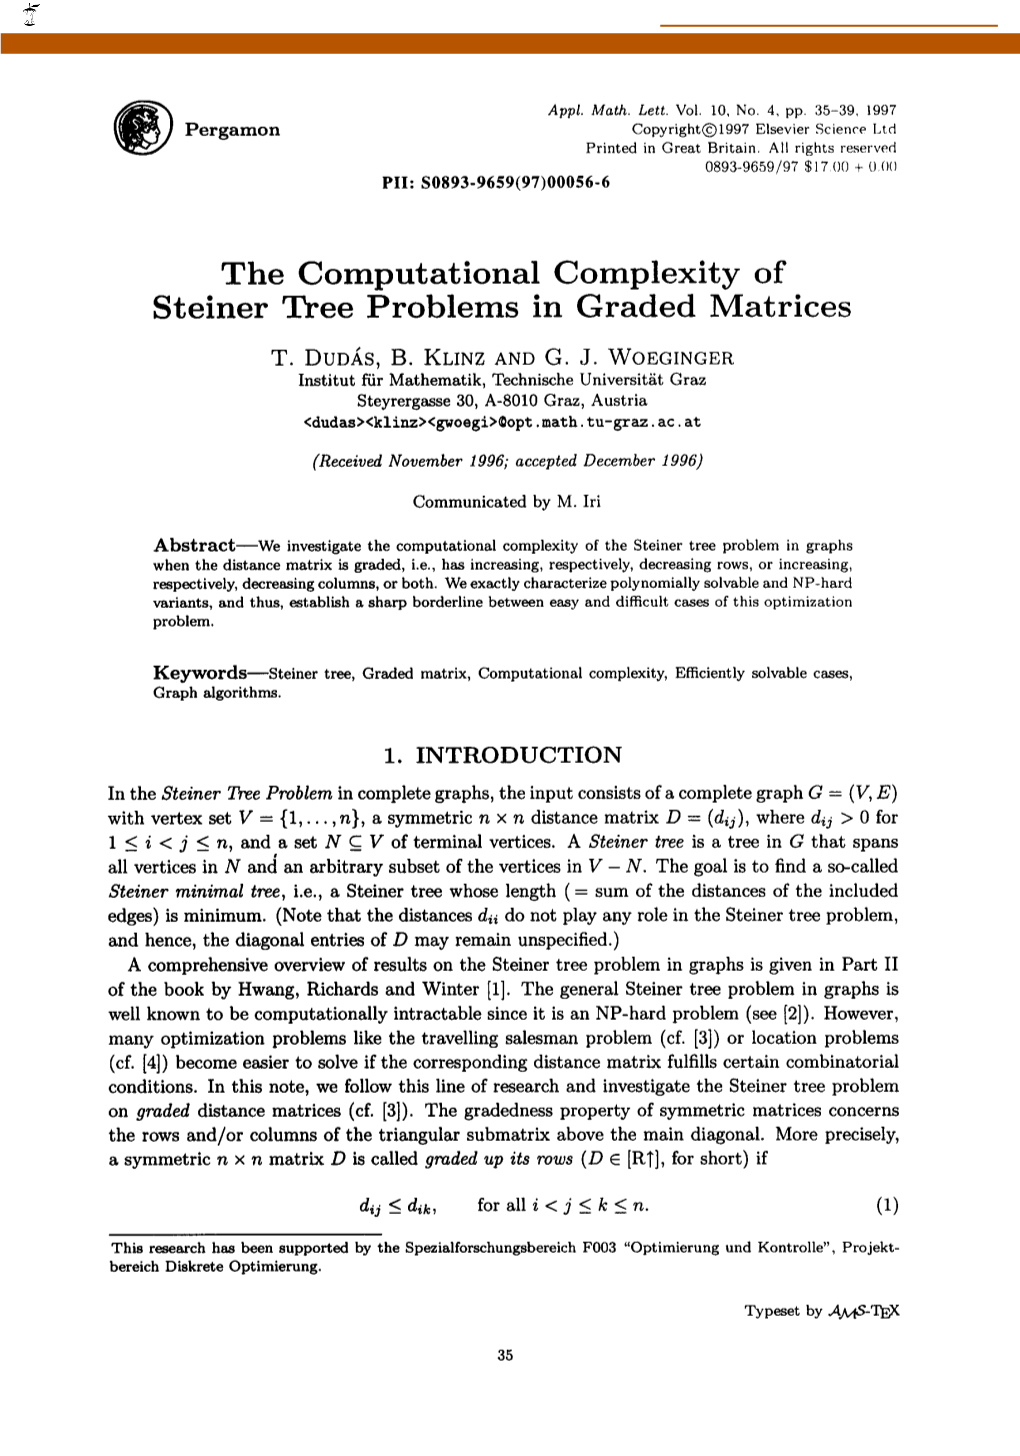 The Computational Complexity of Steiner Tree Problems in Graded Matrices